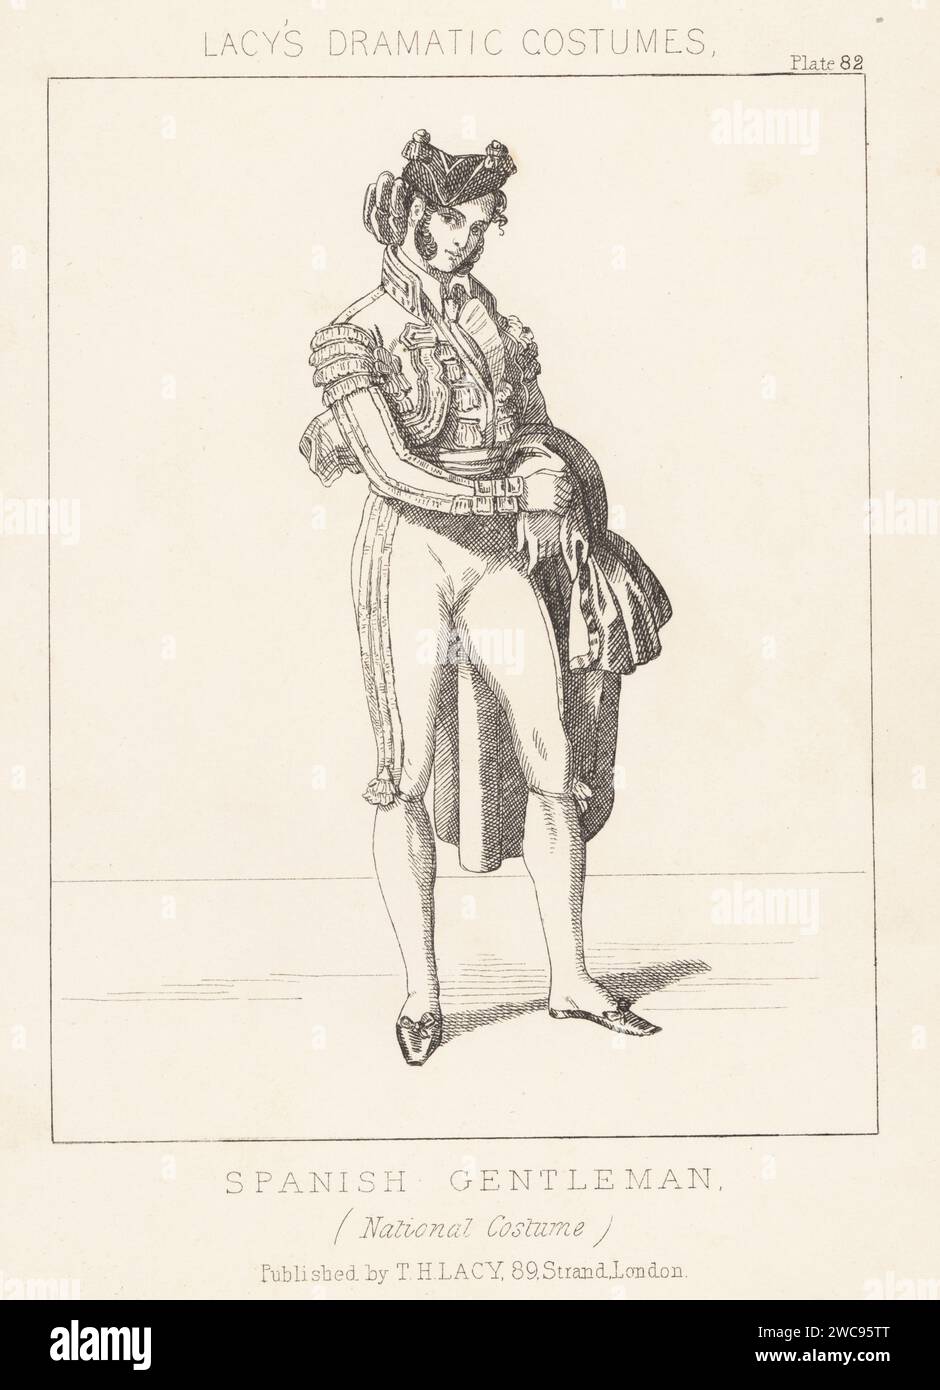 Spanish bullfighter or matador, 19th century. Torero in montera cap, capote de paseo (cape), traje de luces (suit of lights), jacket, stockings, slippers, holding the muleta (cloak) Spanish gentleman (sic), National Costume. Lithograph from Thomas Hailes Lacy's Male Costumes, Historical, National and Dramatic in 200 Plates, London, 1865. Lacy (1809-1873) was a British actor, playwright, theatrical manager and publisher. Stock Photo